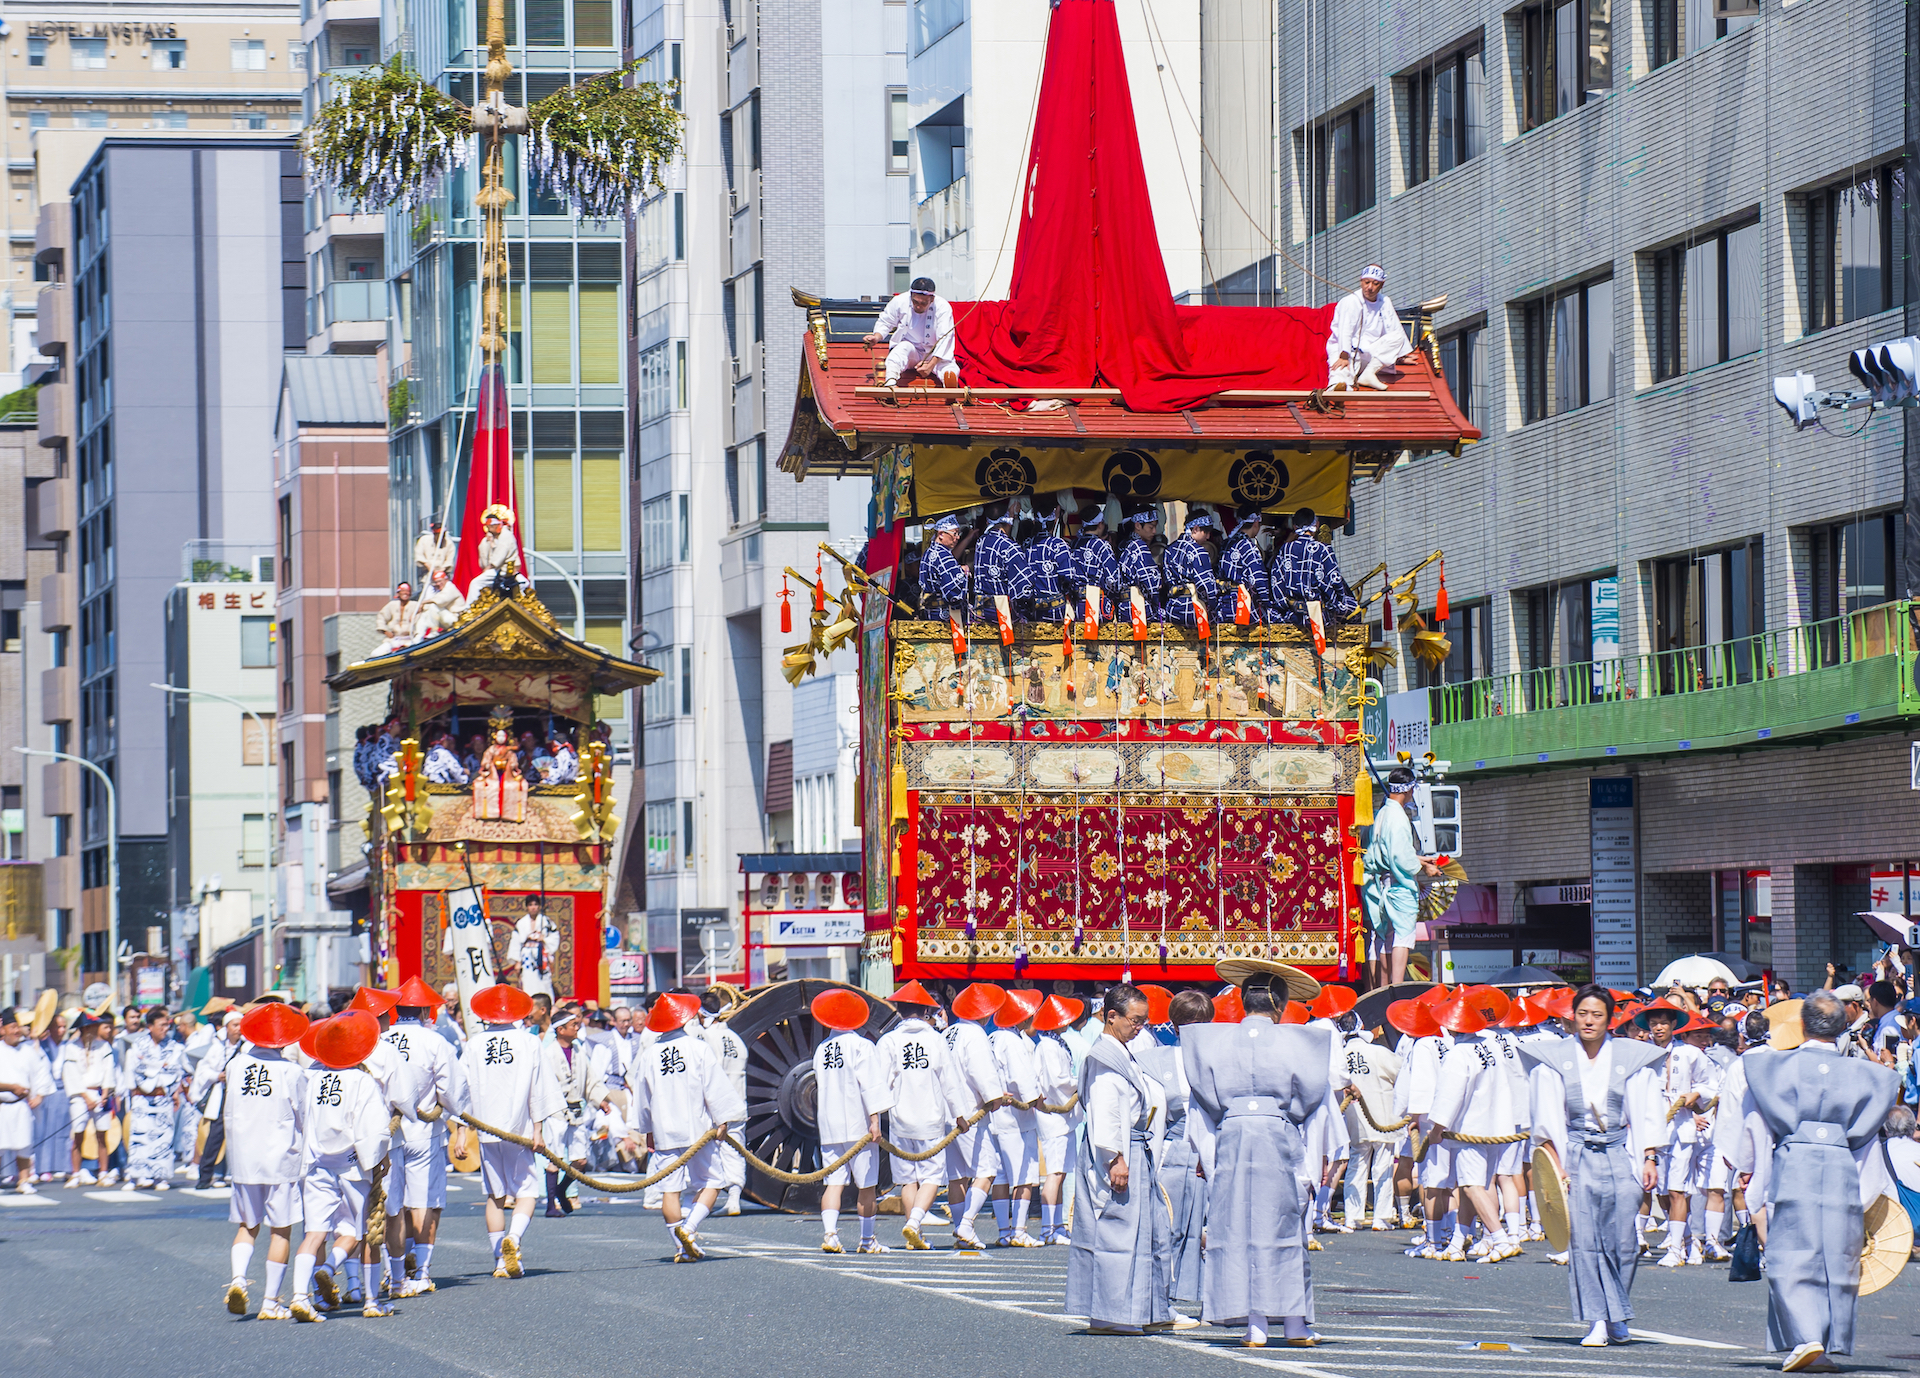 10 most spectacular traditional festivals you must see in Japan